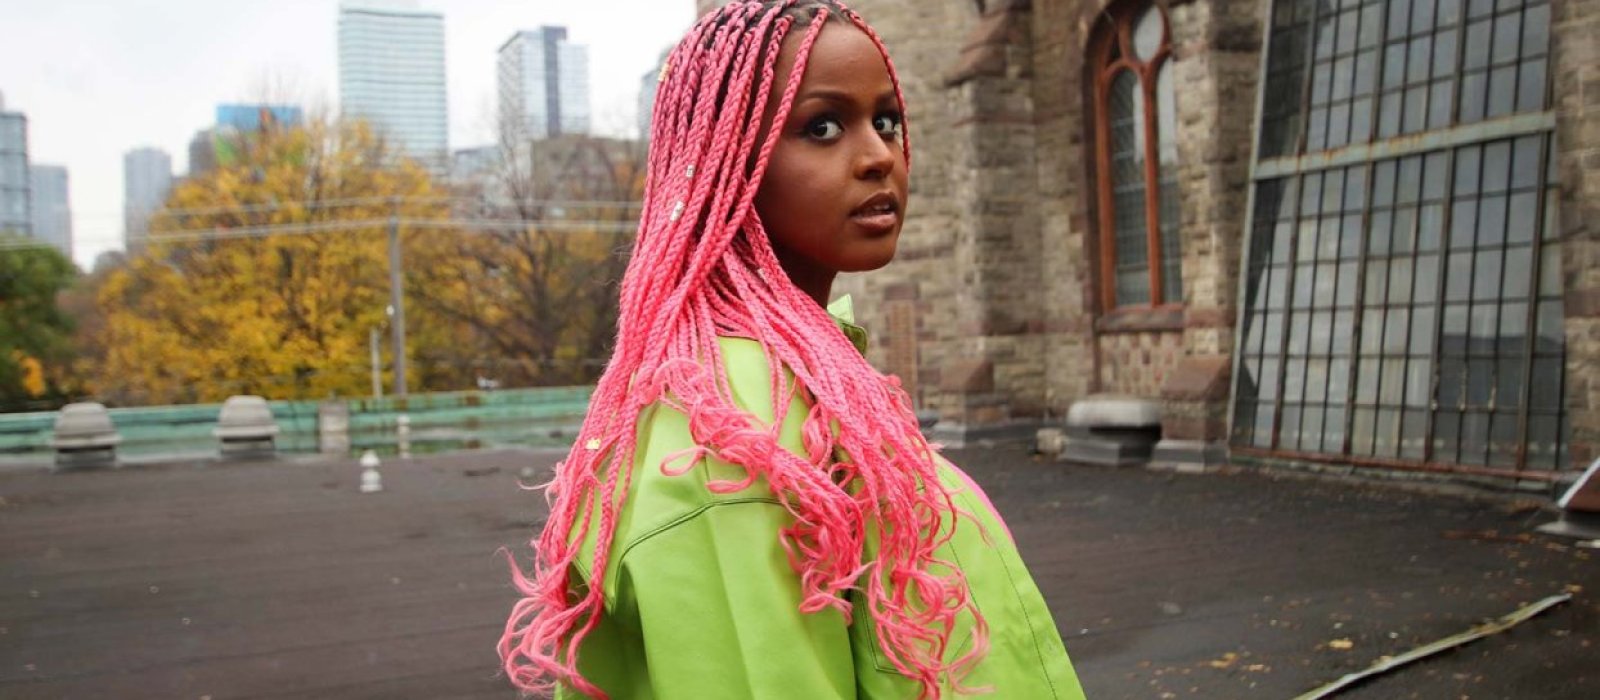 Photo of Fatuma Adar by Graham Isador, outdoors, with pink hair and a bright green jacket.